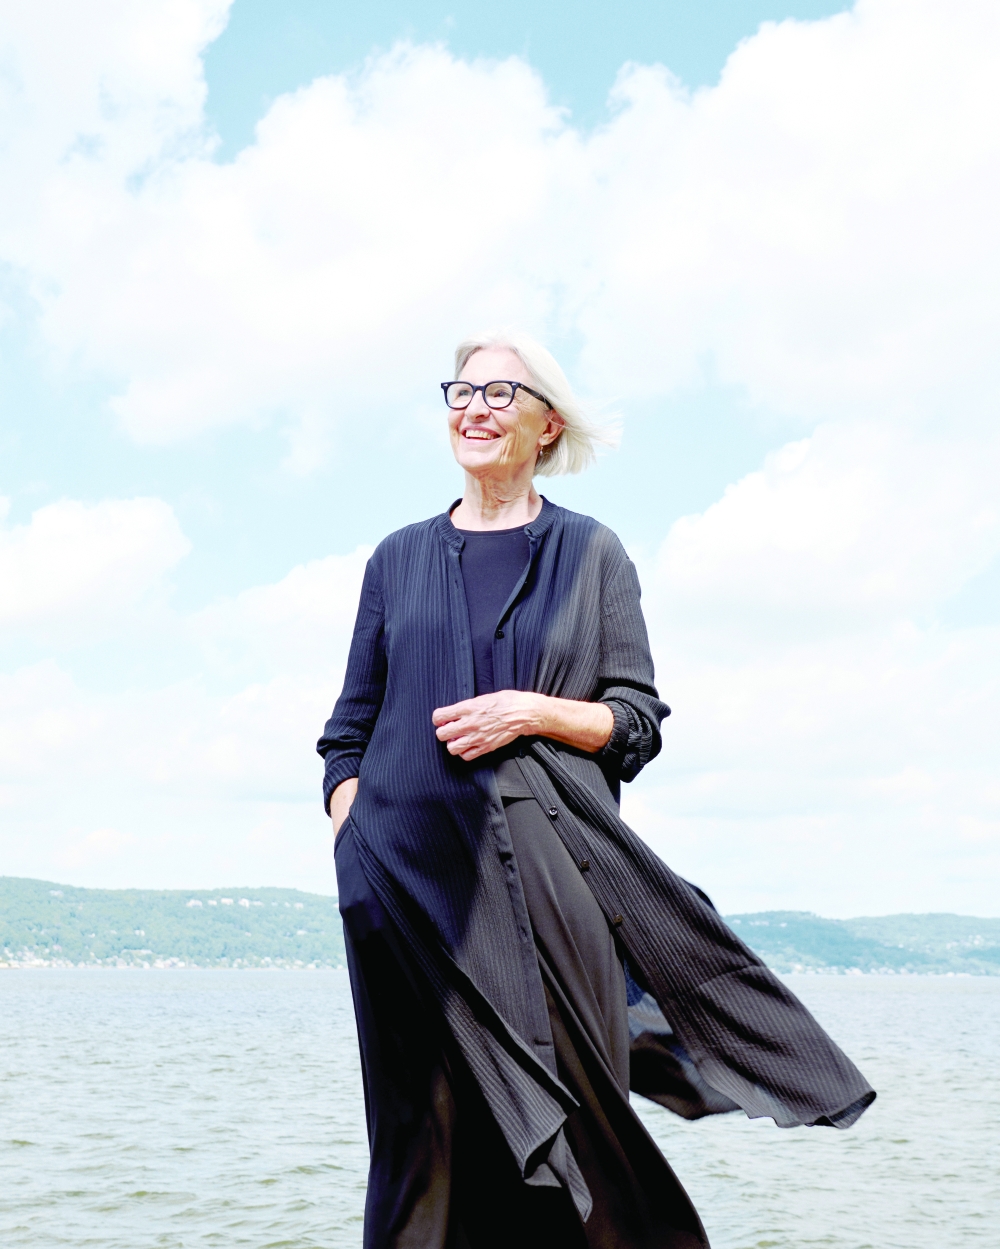 Eileen Fisher built a fashion empire. Her employees now own nearly